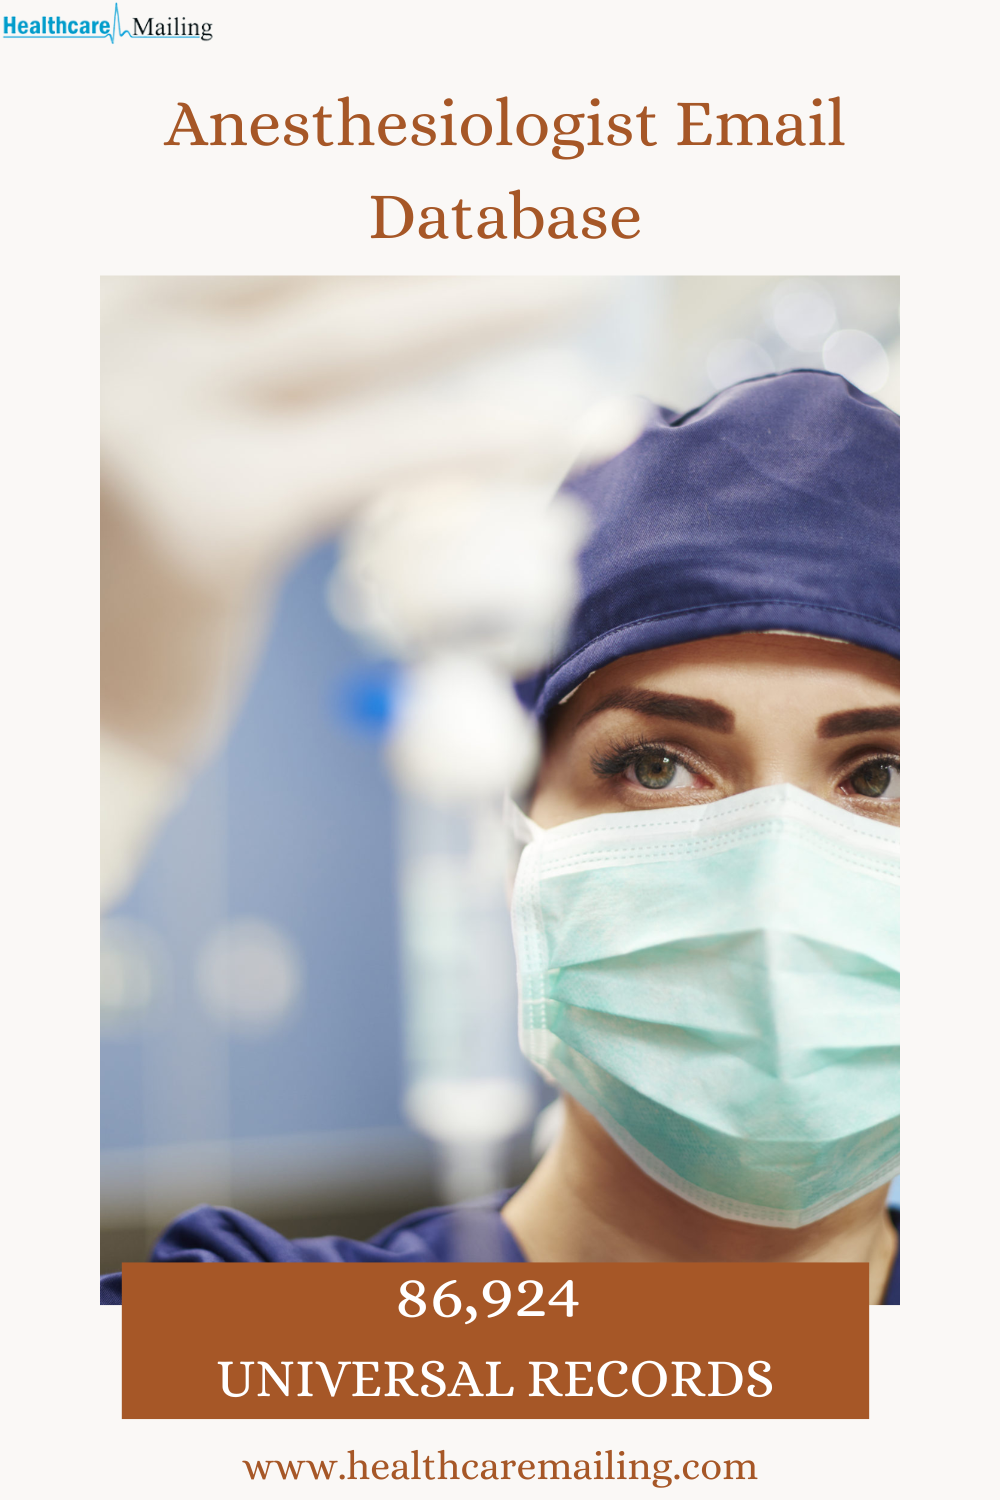 Anesthesiologist Email List | Mailing list of Anesthesiologist Email List